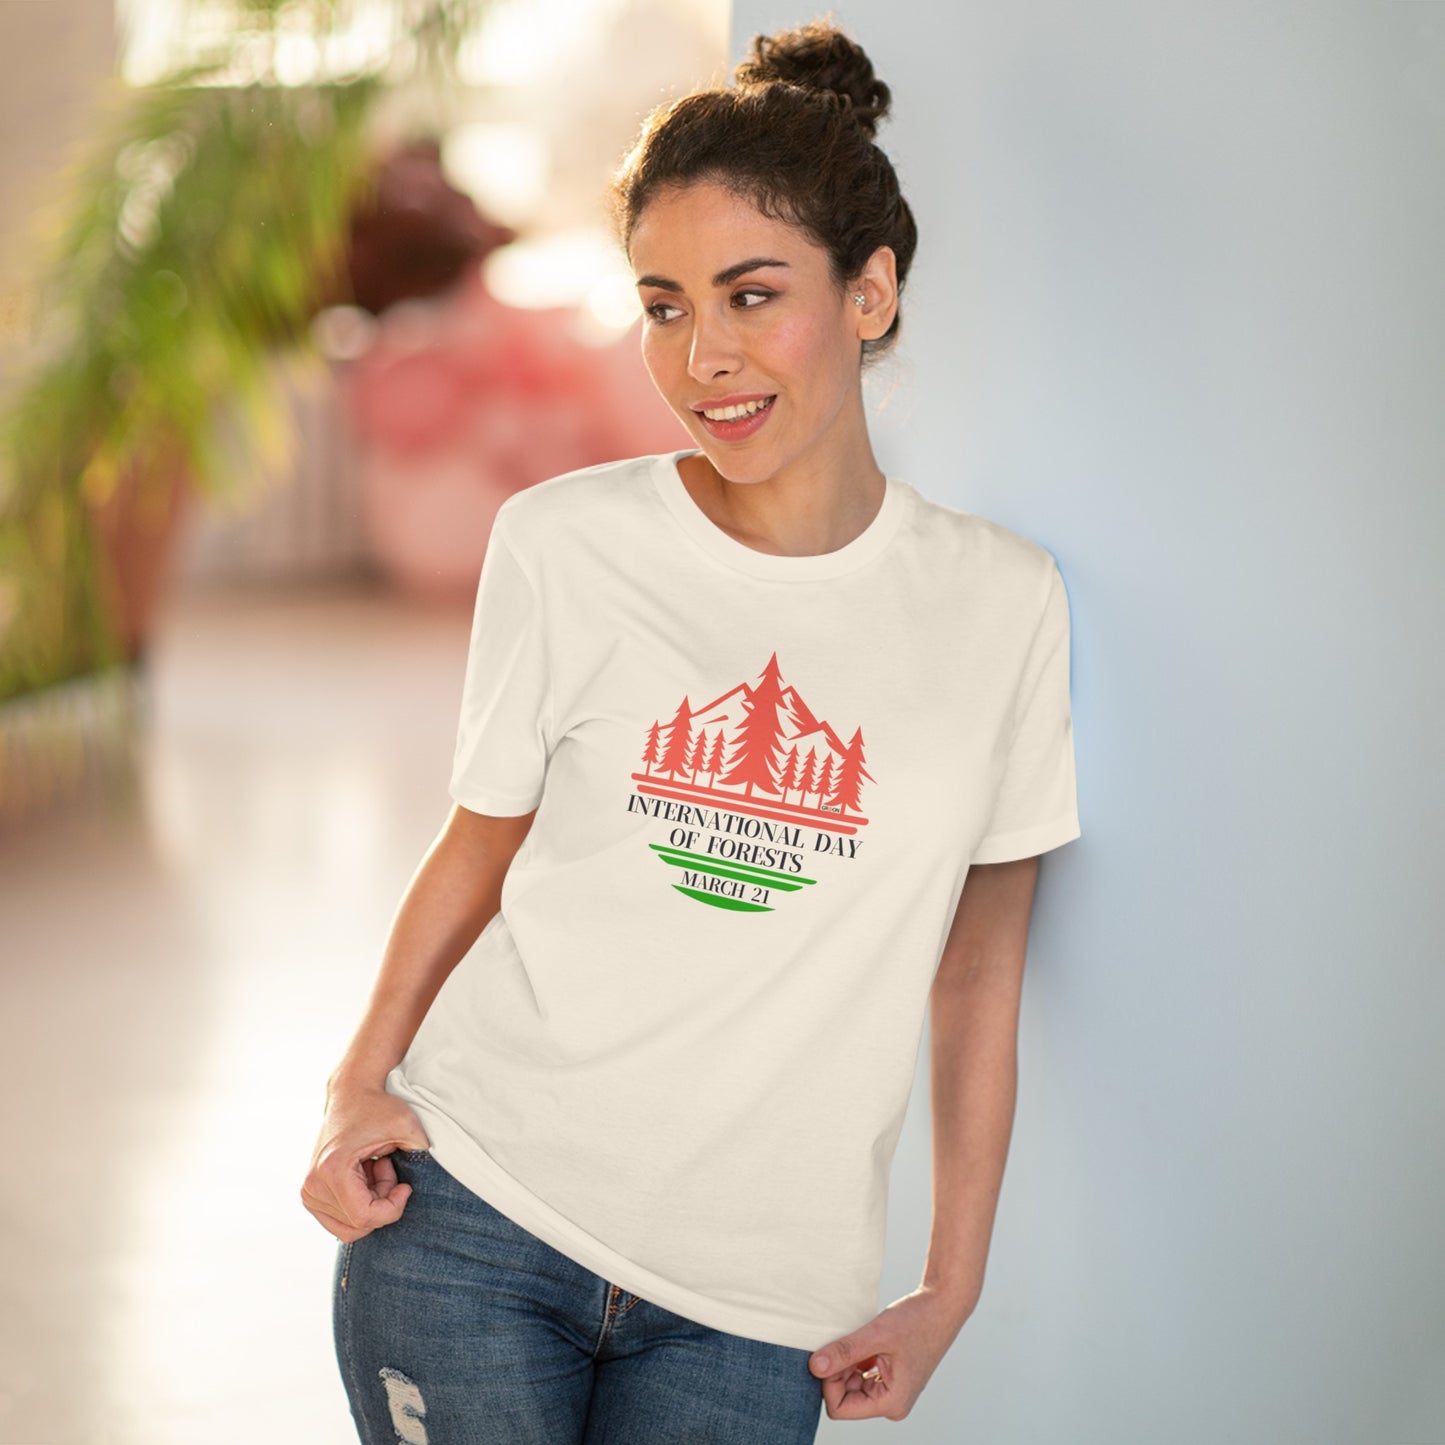 International Day of Forests, Model wearing a GR@ON T-Shirt made from organic cotton, featuring a stylish and sustainable design. GR@ON T-Shirts: Sustainable style, everyday comfort.